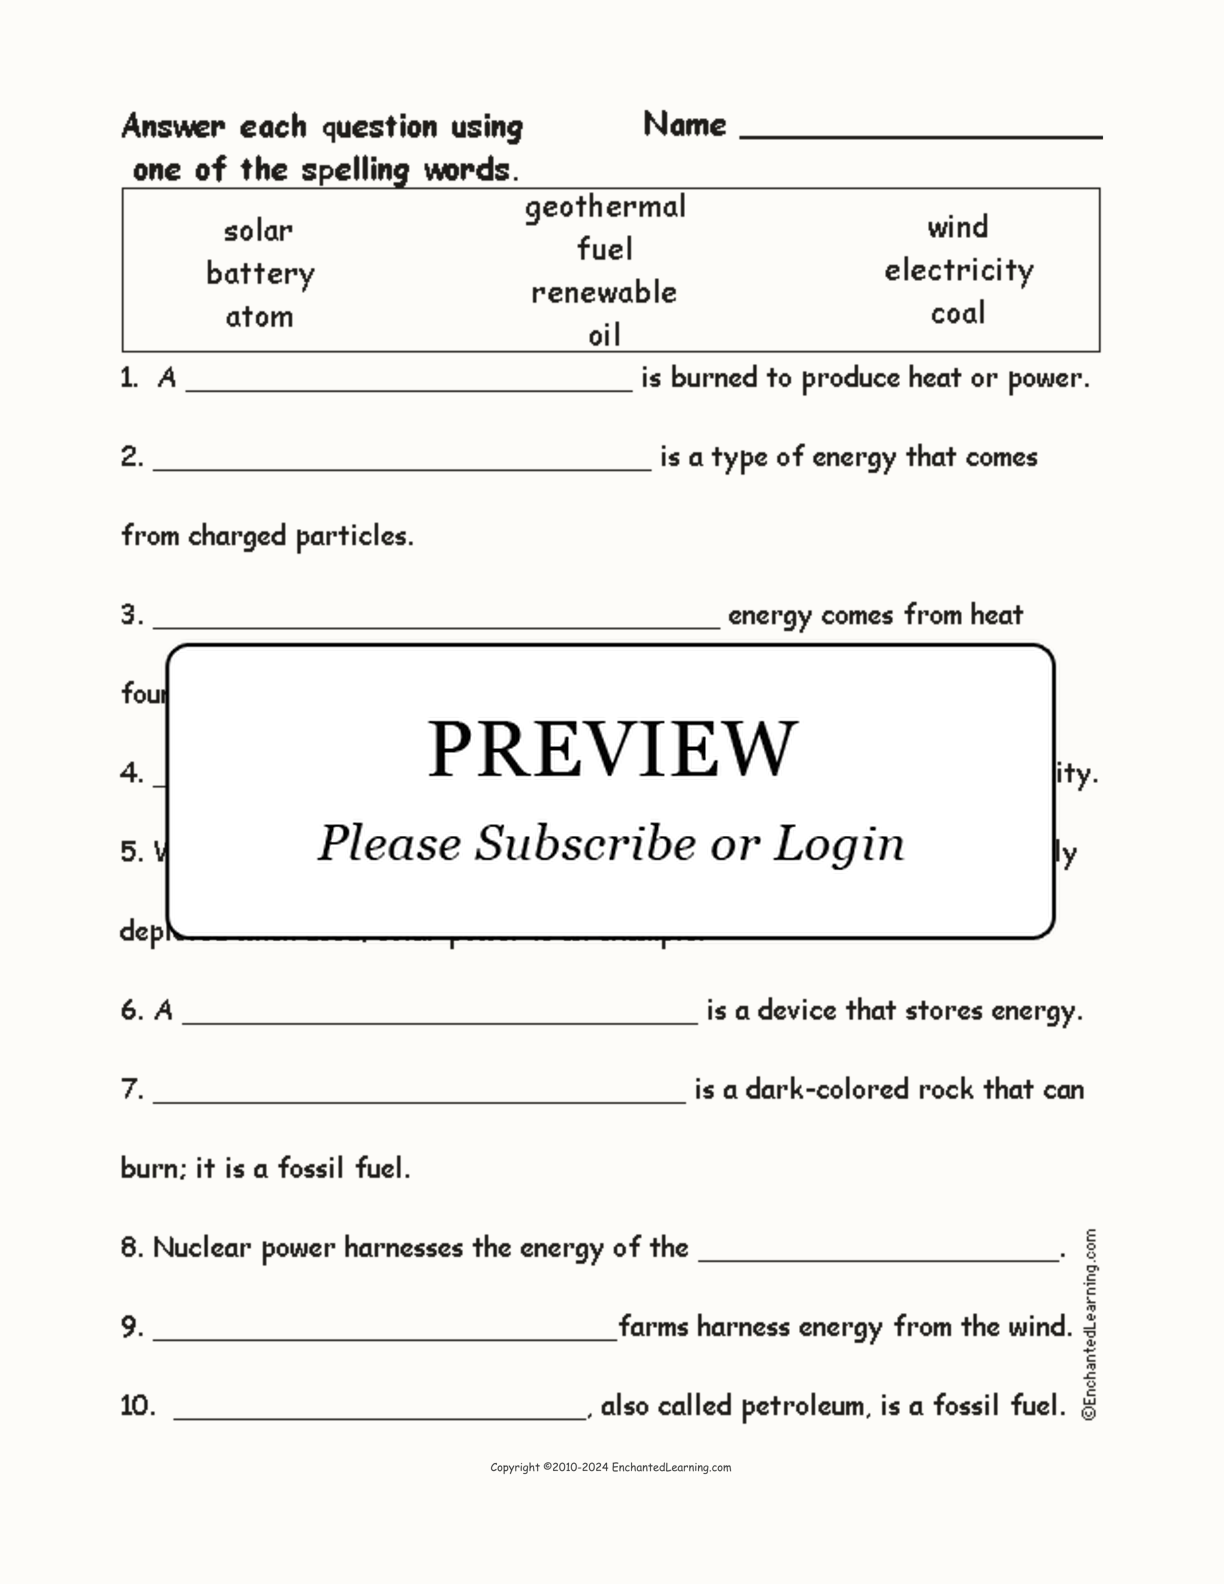 Energy Spelling Word Questions interactive worksheet page 1